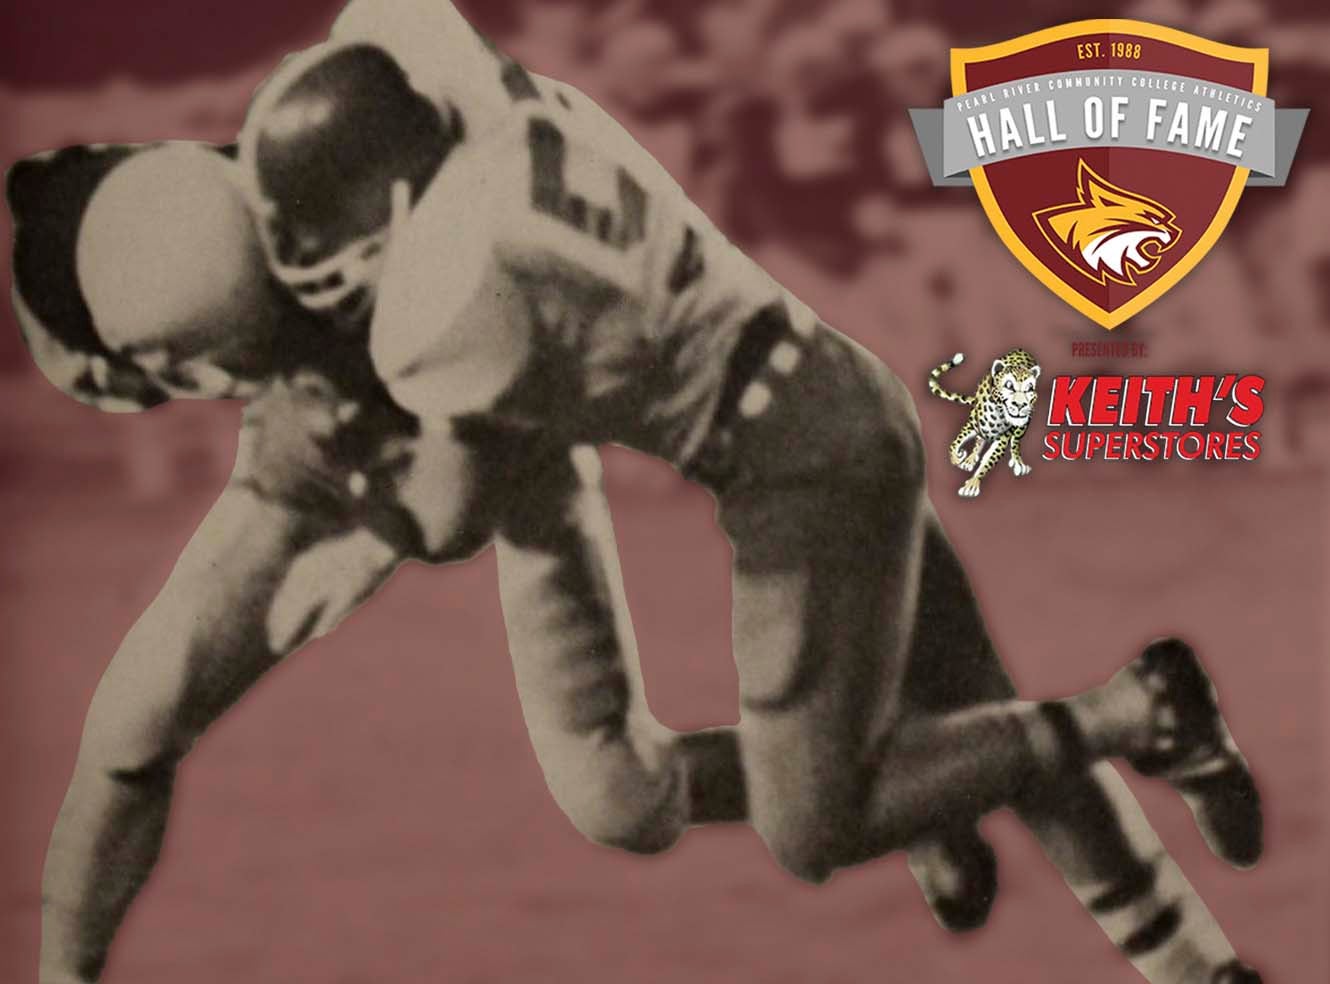 5 PRCC championship teams will be recognized at 2023 Hall of Fame -  Picayune Item